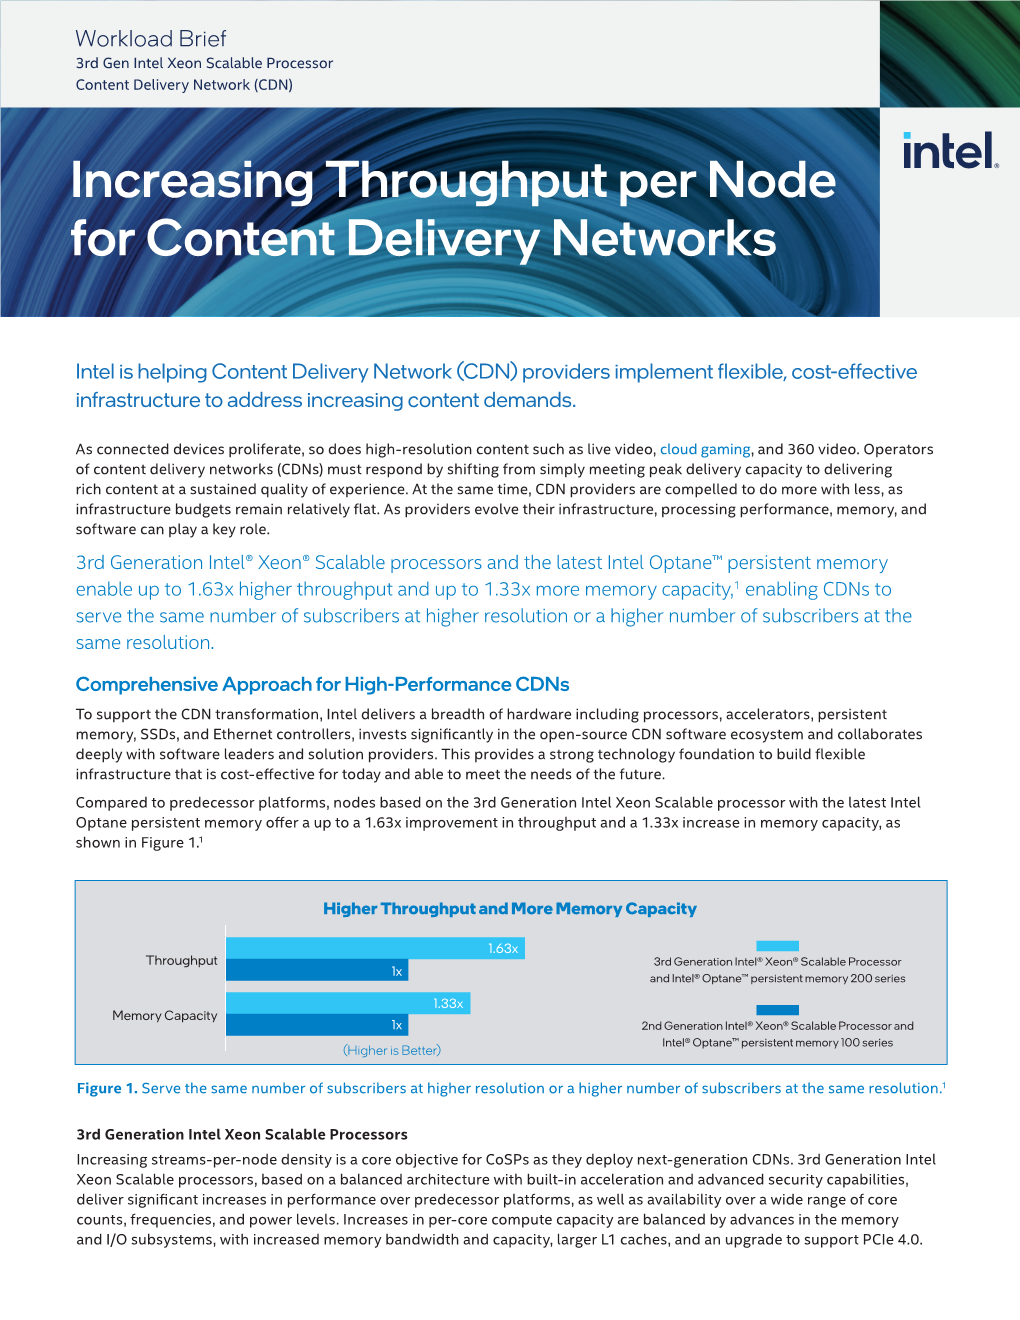 Increasing Throughput Per Node for Content Delivery Networks